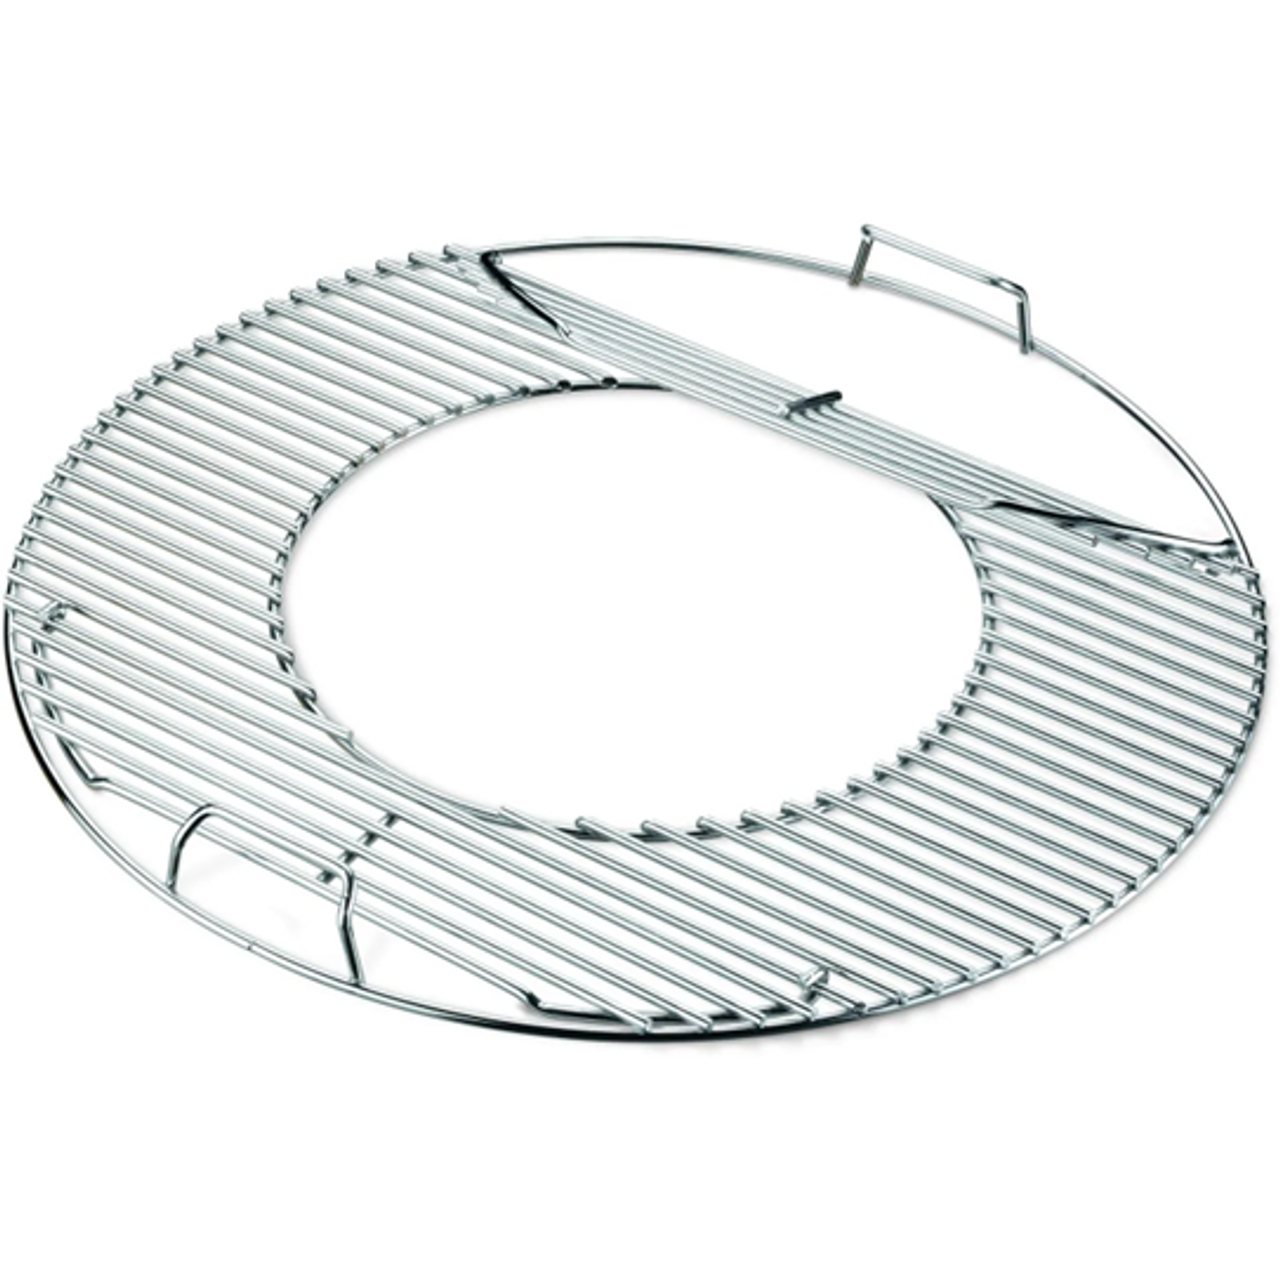 Weber Hinged Replacement Cooking Grate with Removable Center for 22-1/2 in. Charcoal Grill